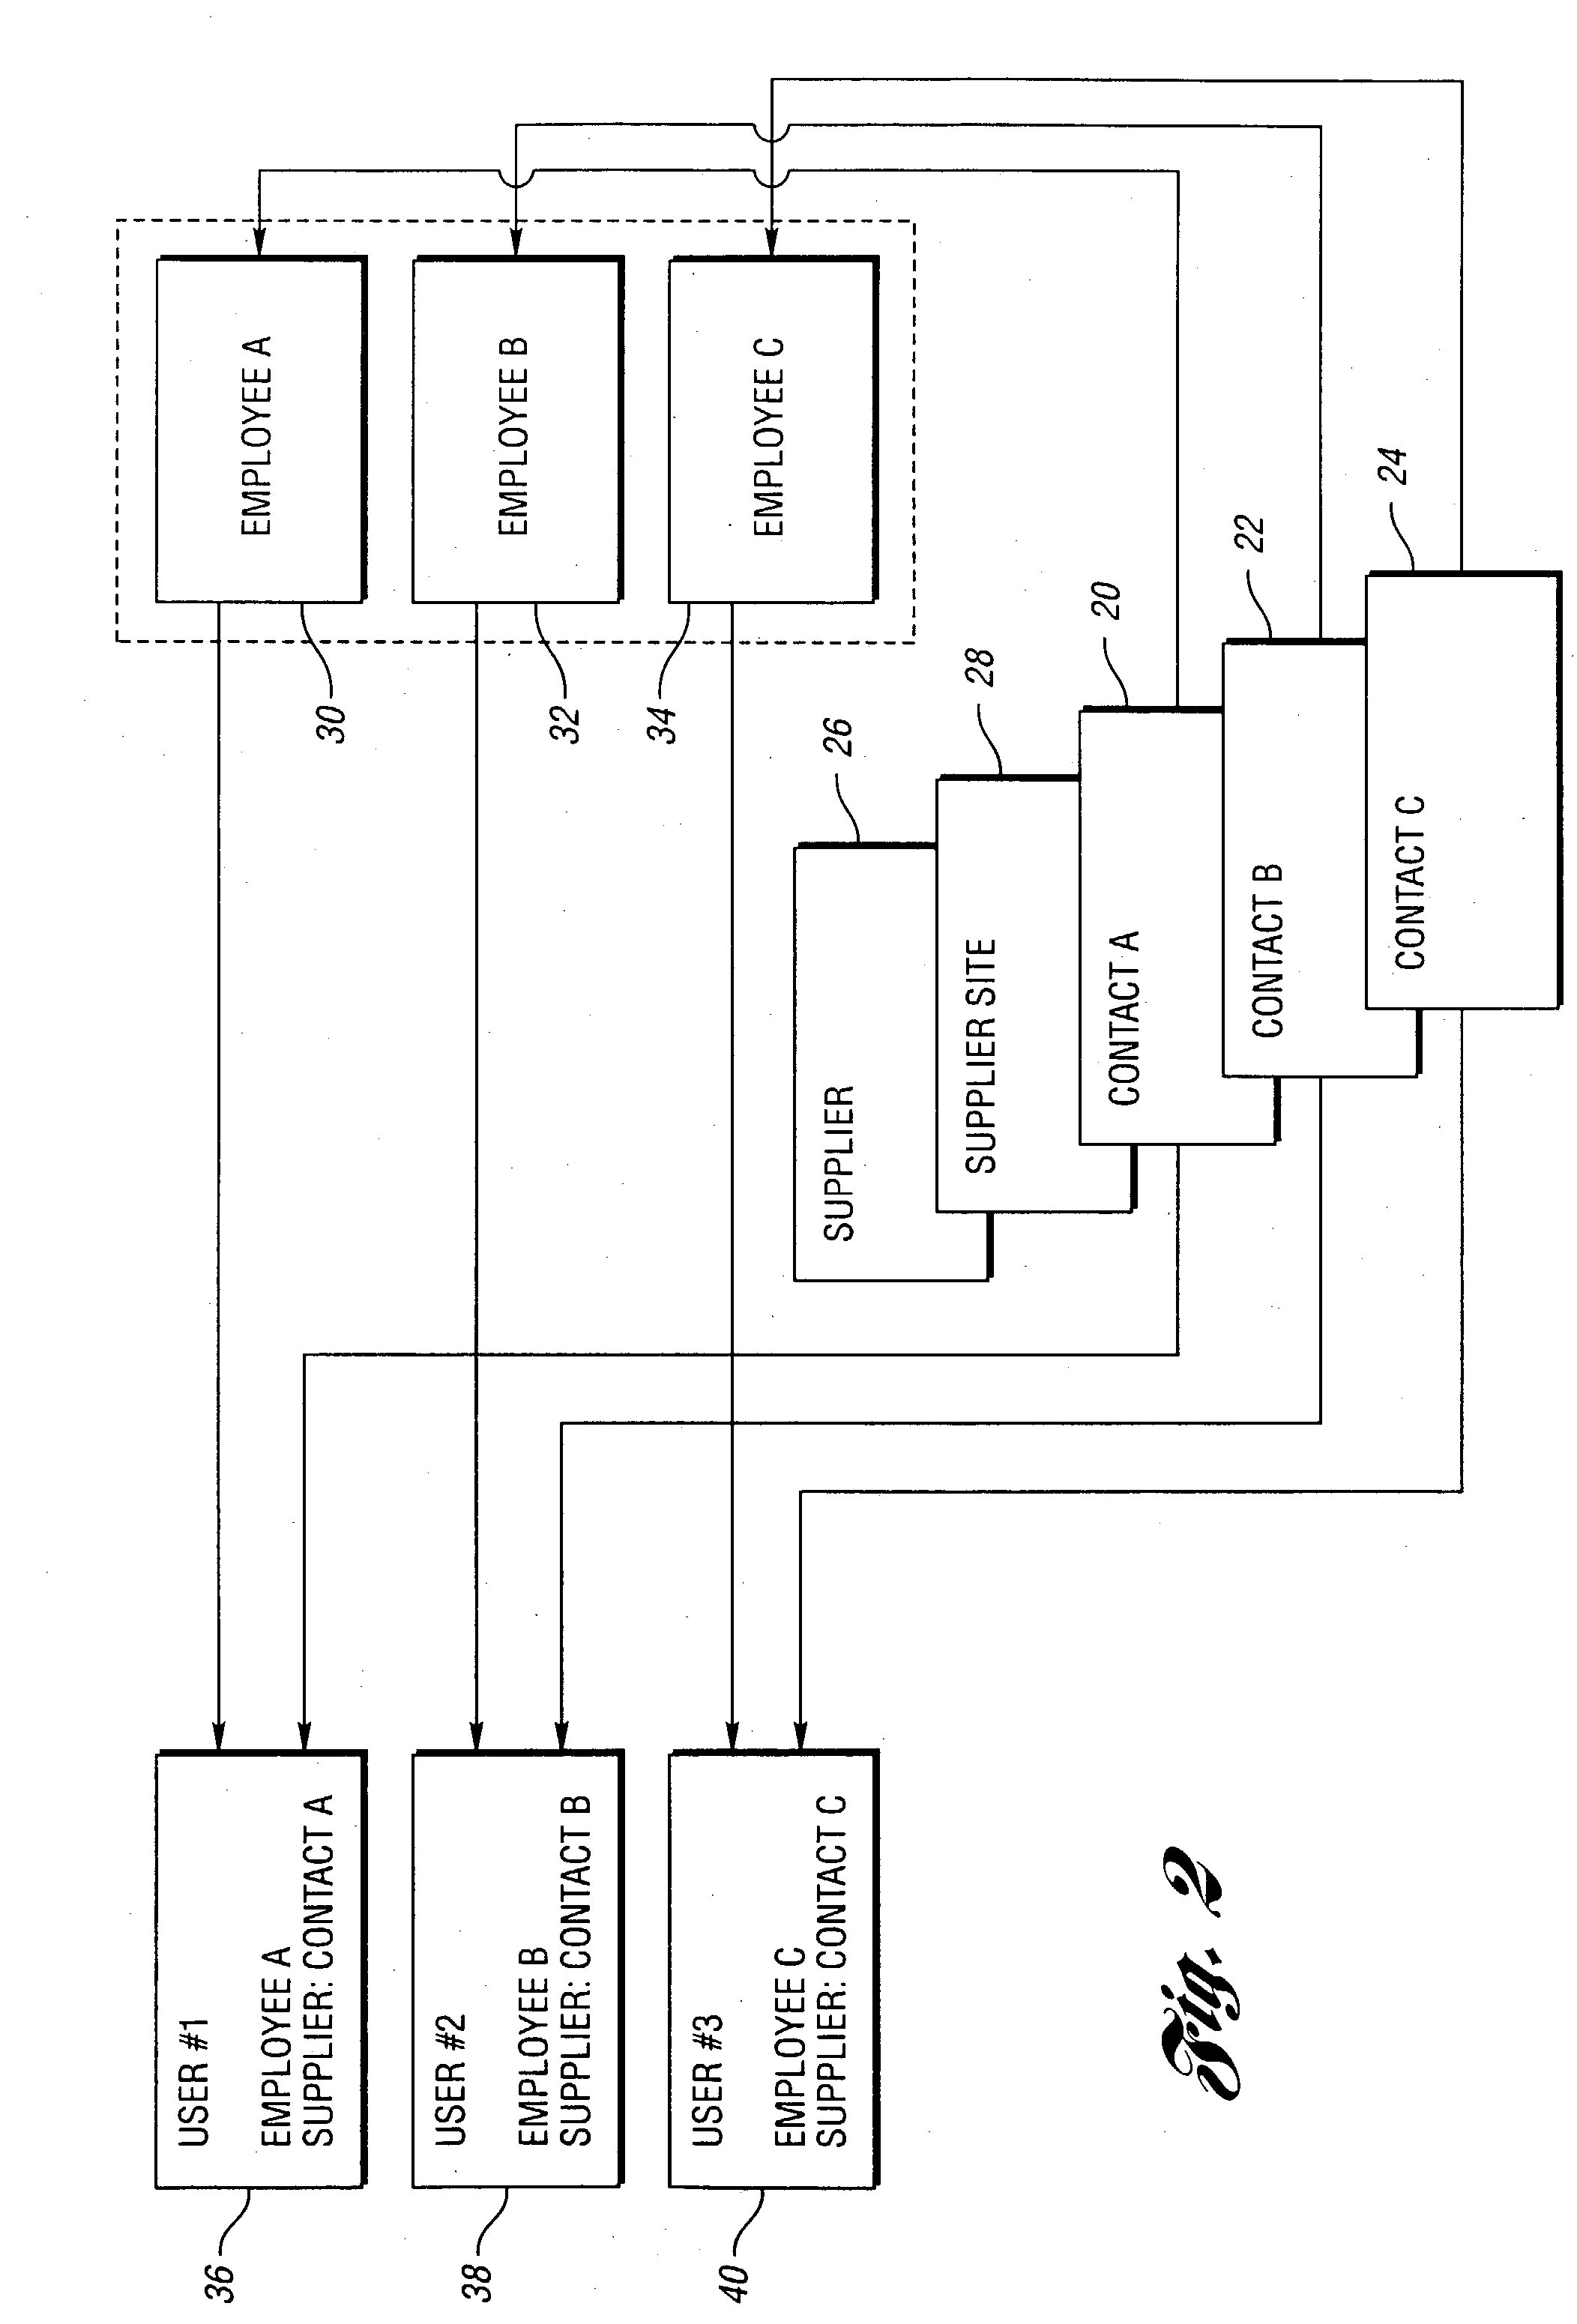 Computer-implemented method and system for managing supplier access to purchasing and inventory transactions